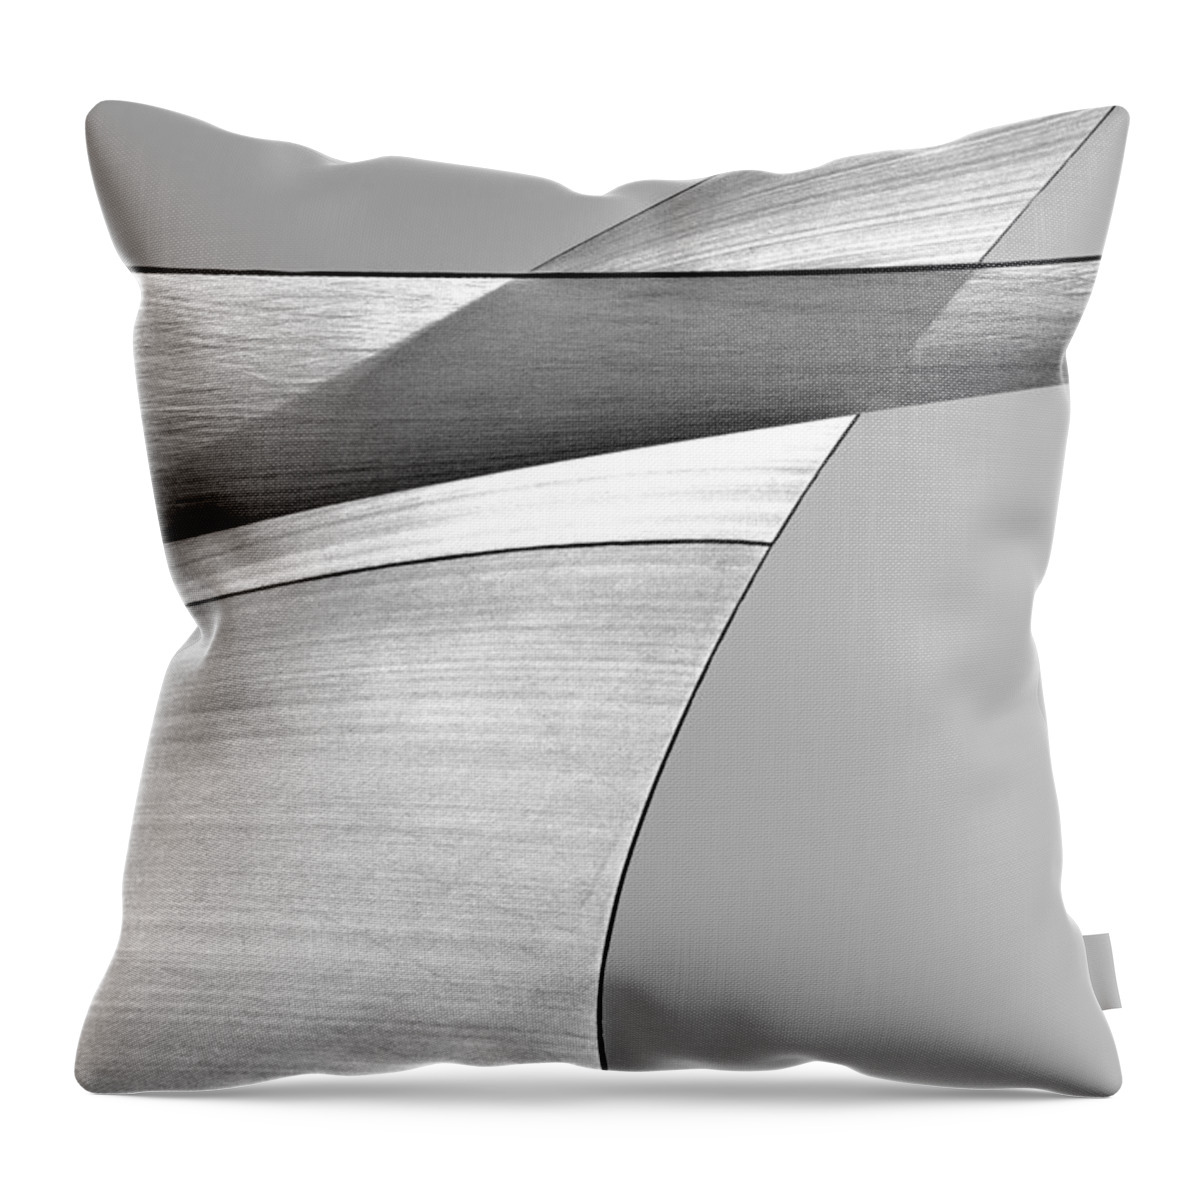 Abstract Sailcloth Canvas Black And White Nautical Sailboat Sailboats Boat Boats Design Sailing Bob Orsillo Corporate Decor Decorative Boating Modern Industrial Mancave Art Fine Art Decor Decorative Home Office Gallery Frame Shop Collect Collectible Loft Inspirational Motivation Motivational Zen Meditation Meditate Metaphysical Transcendental Existential Man Cave Yacht Yachting Peaceful Serene Calming Uplifting Interior Designflowingsky Orsillo Throw Pillow featuring the photograph Sailcloth Abstract Number 4 by Bob Orsillo